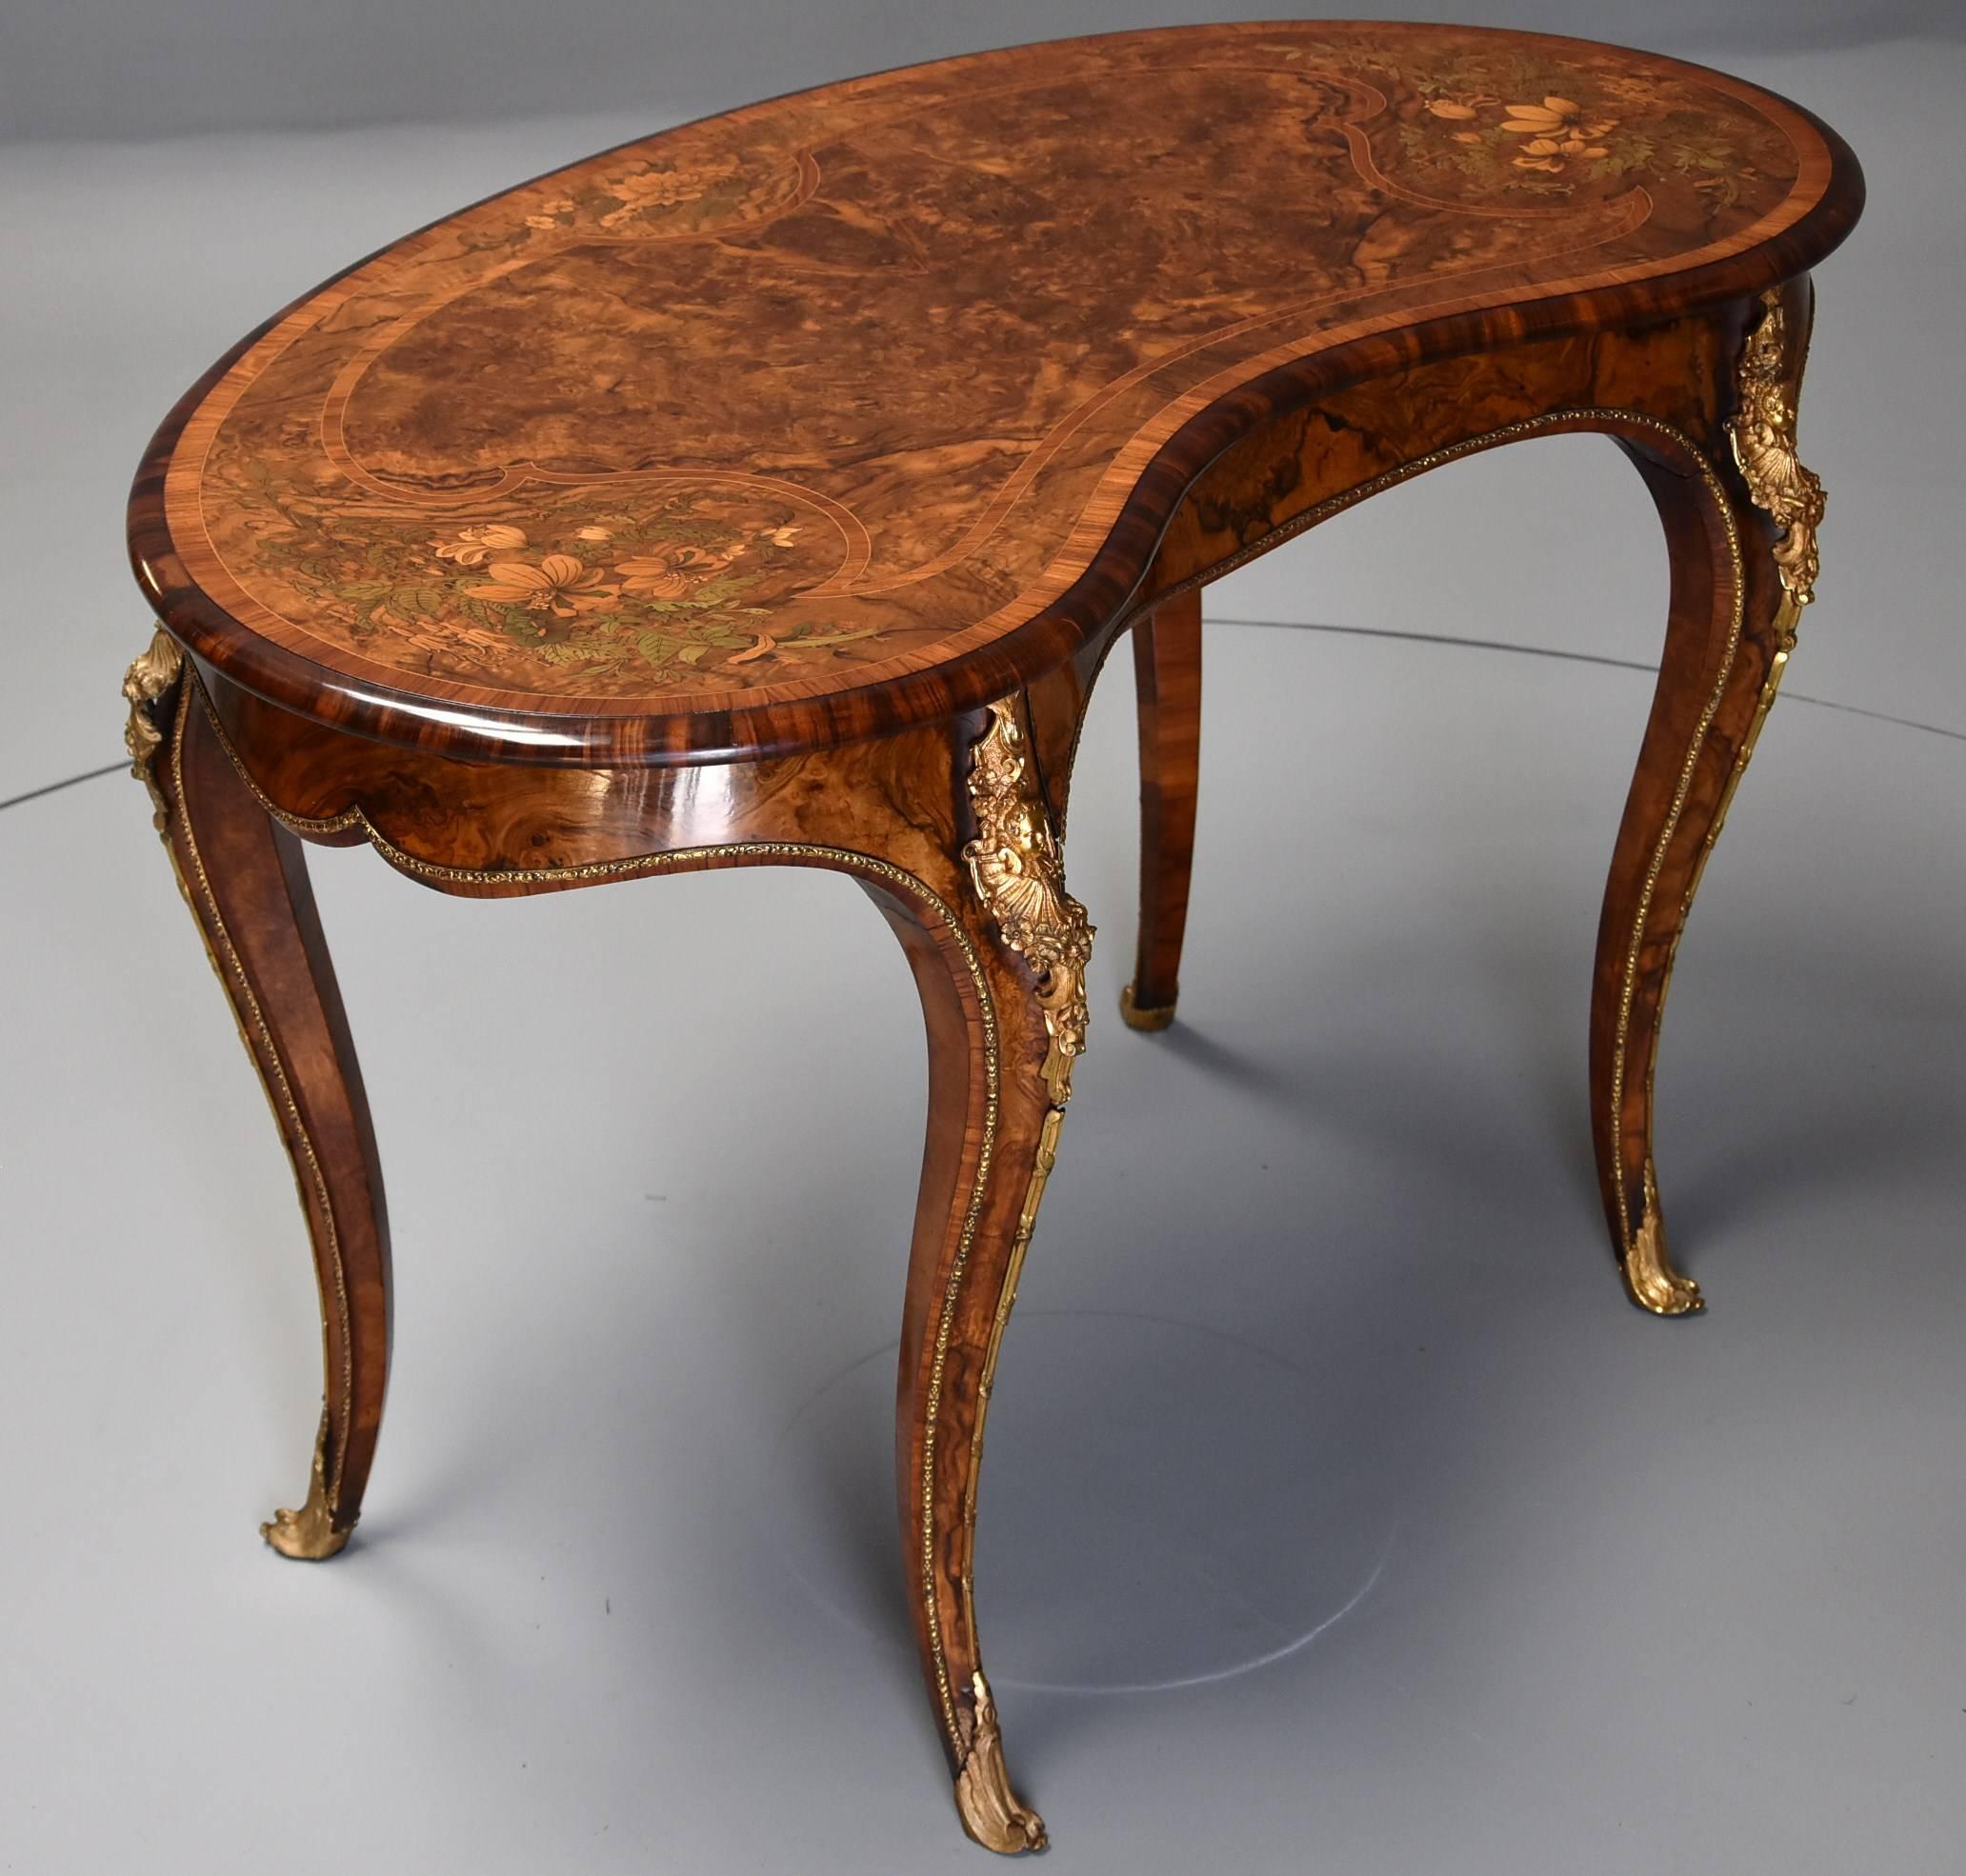 English Superb Quality Mid-19th Century Burr Walnut and Marquetry Kidney Shape Table For Sale